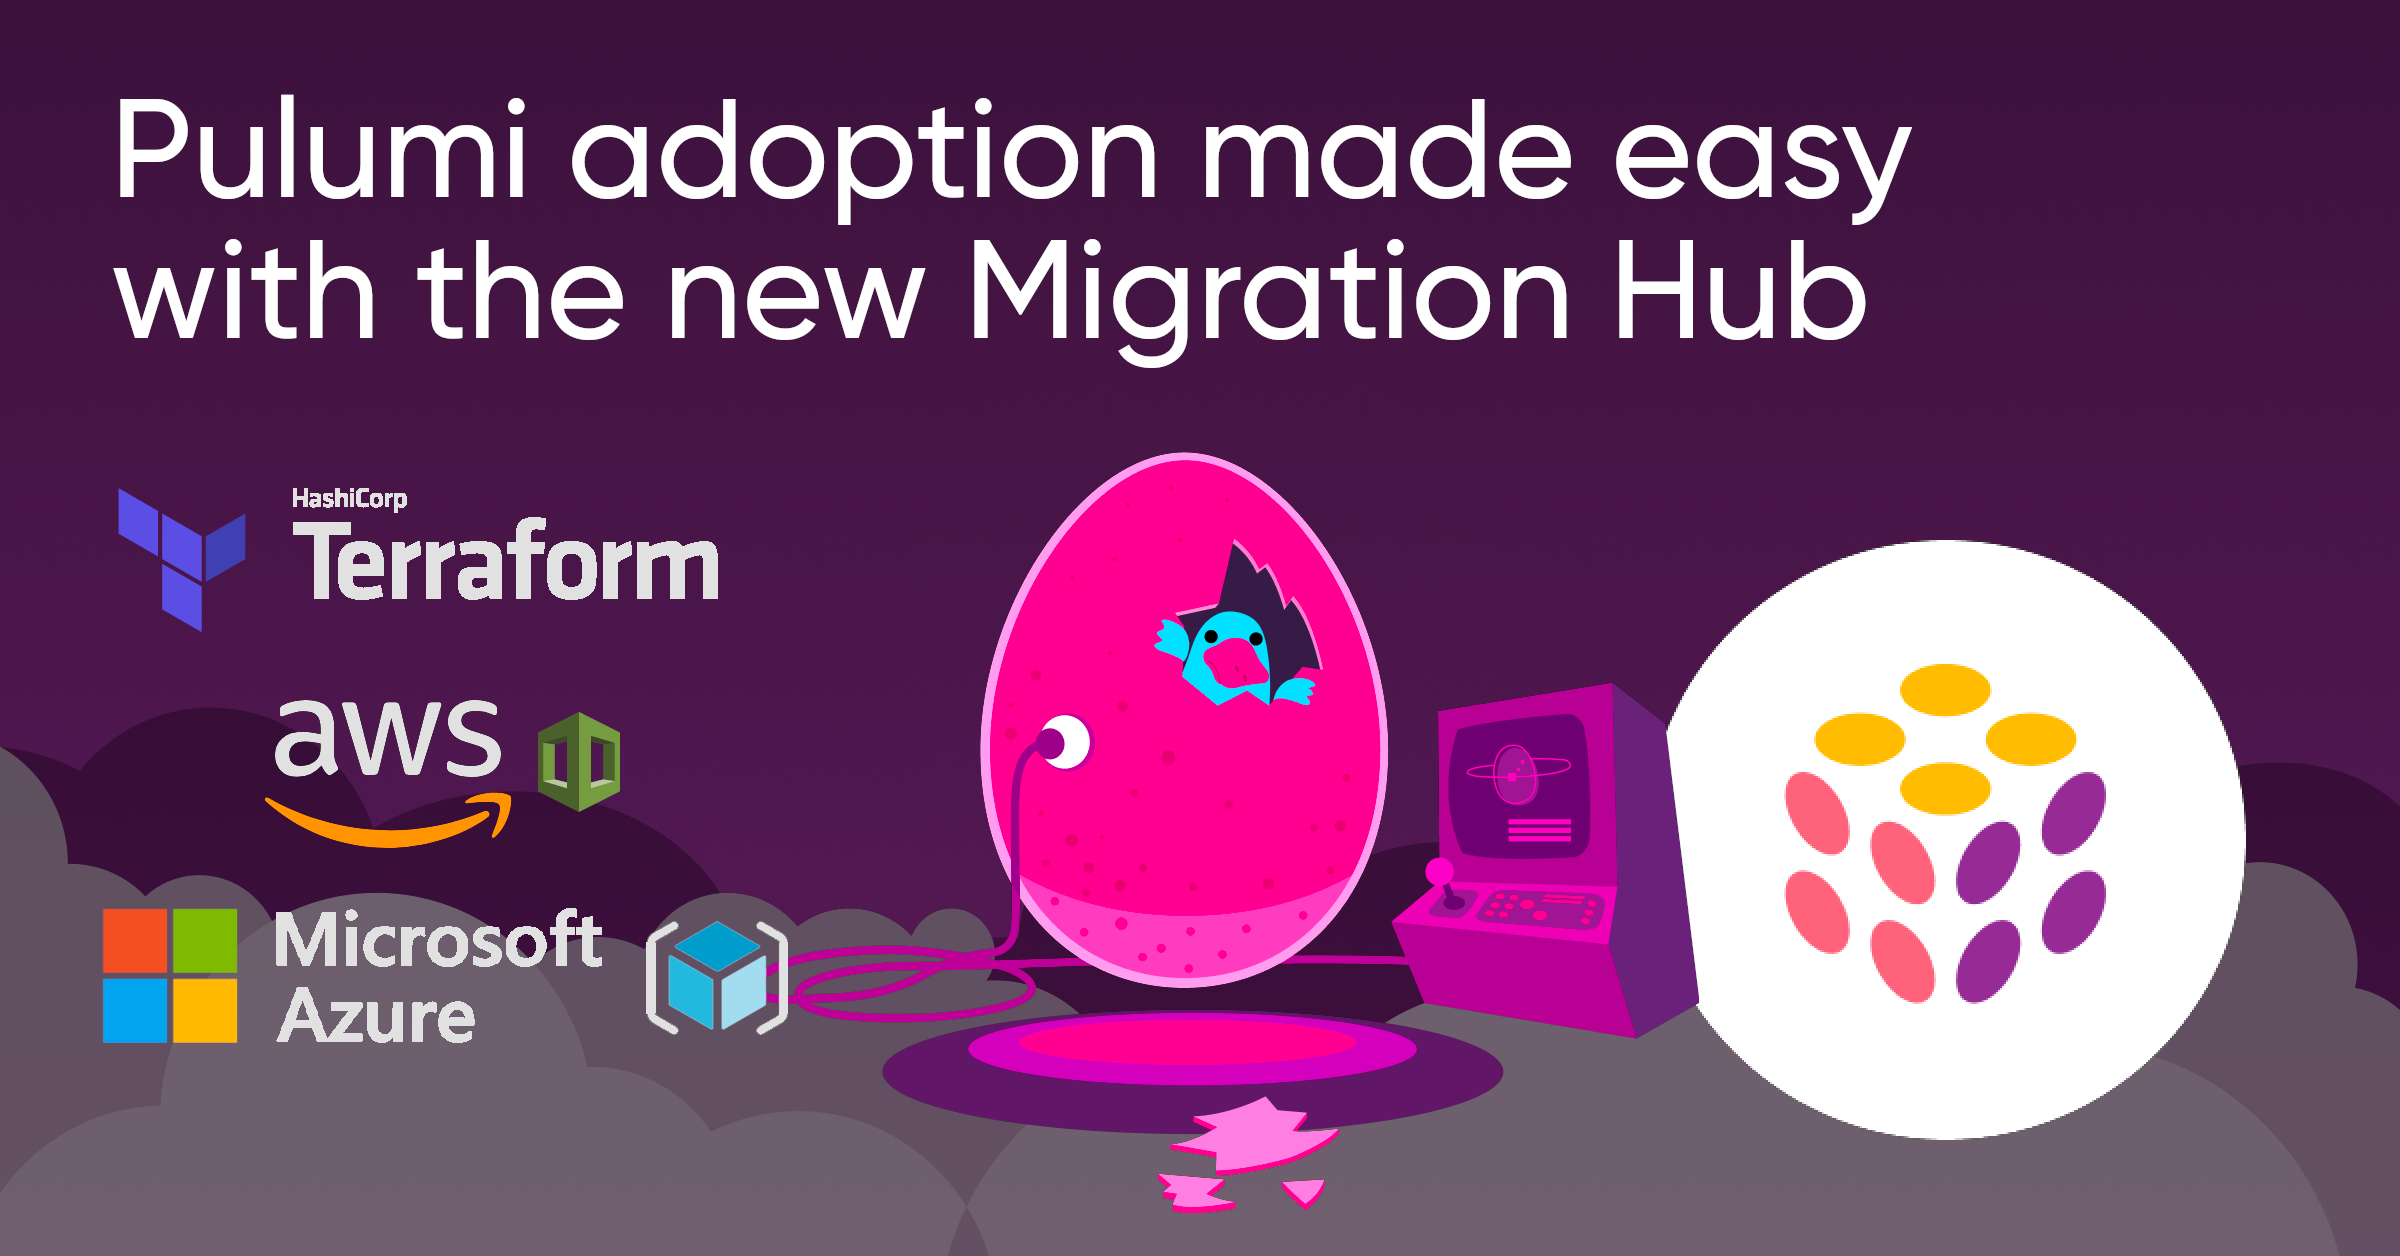 Pulumi adoption made easy with the new Migration Hub